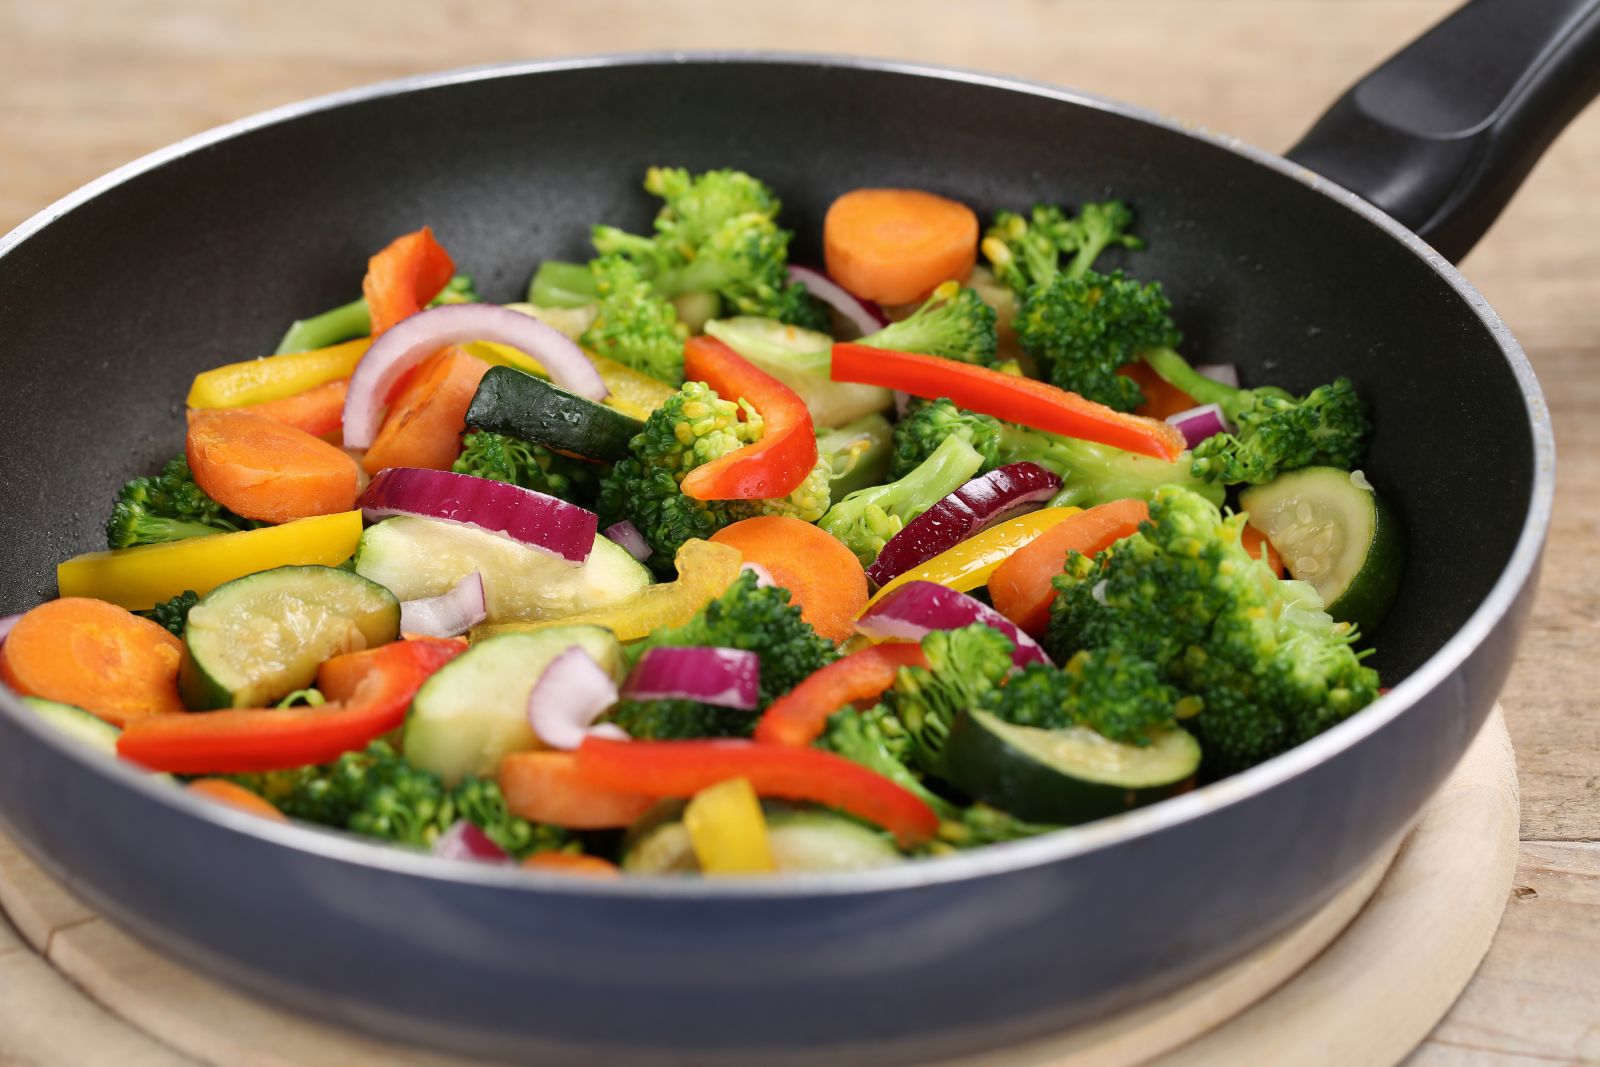 5 easy ways to add fruits and vegetables to dinner - Harvard Health